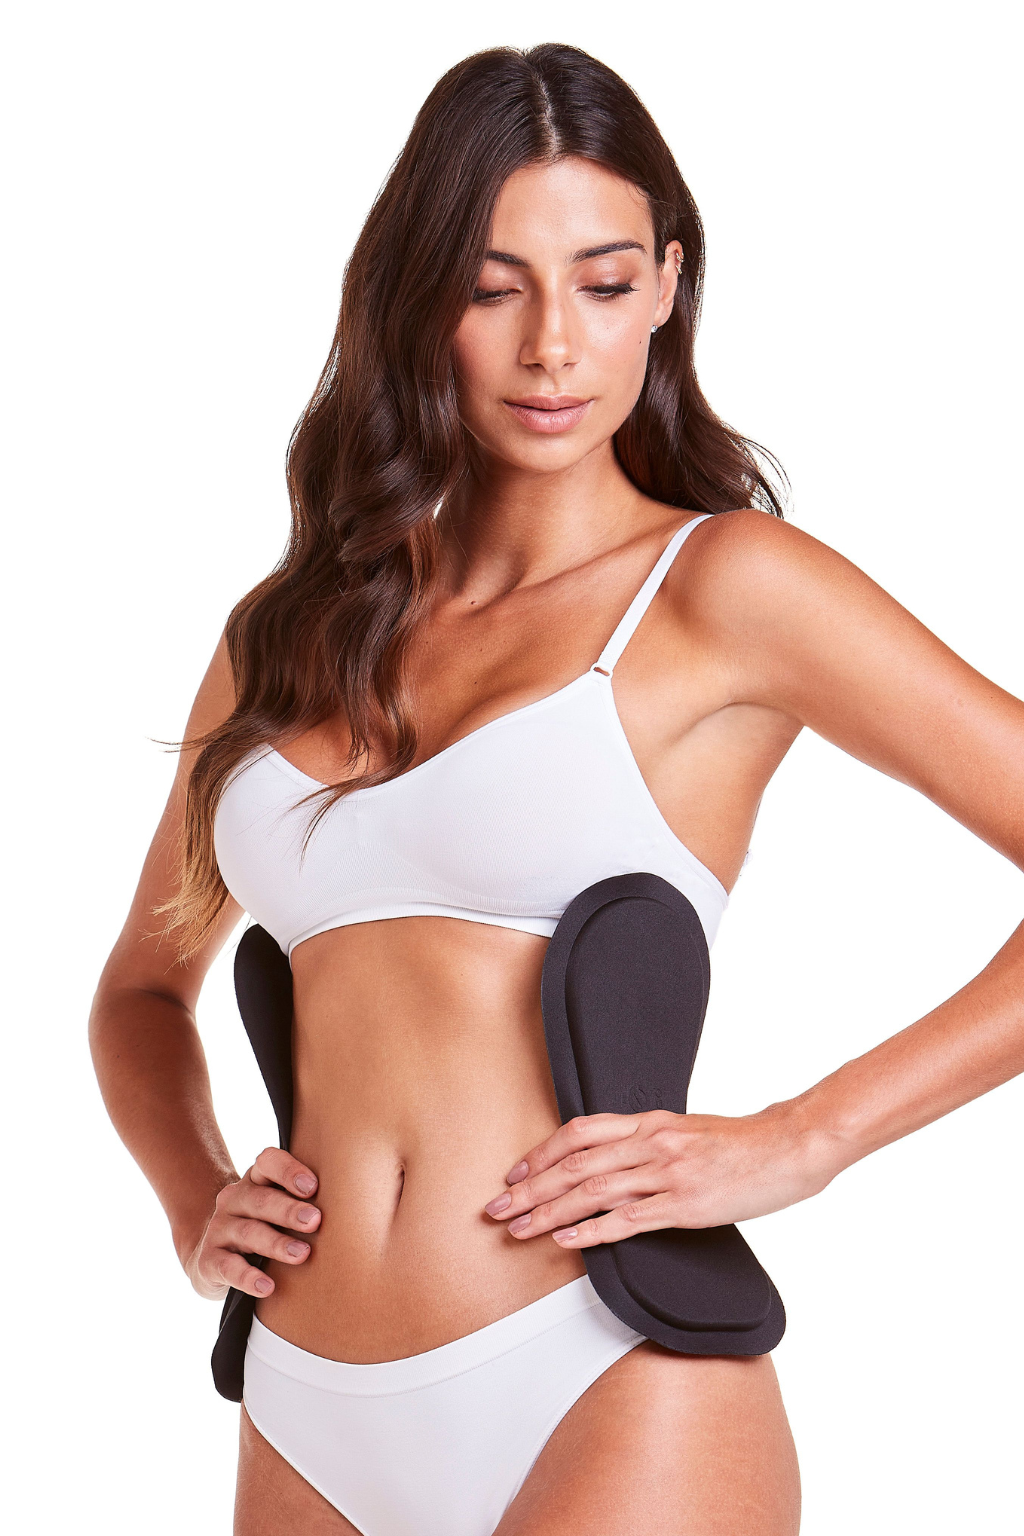 Advanced Unisex Flank Support pad for postoperative recovery